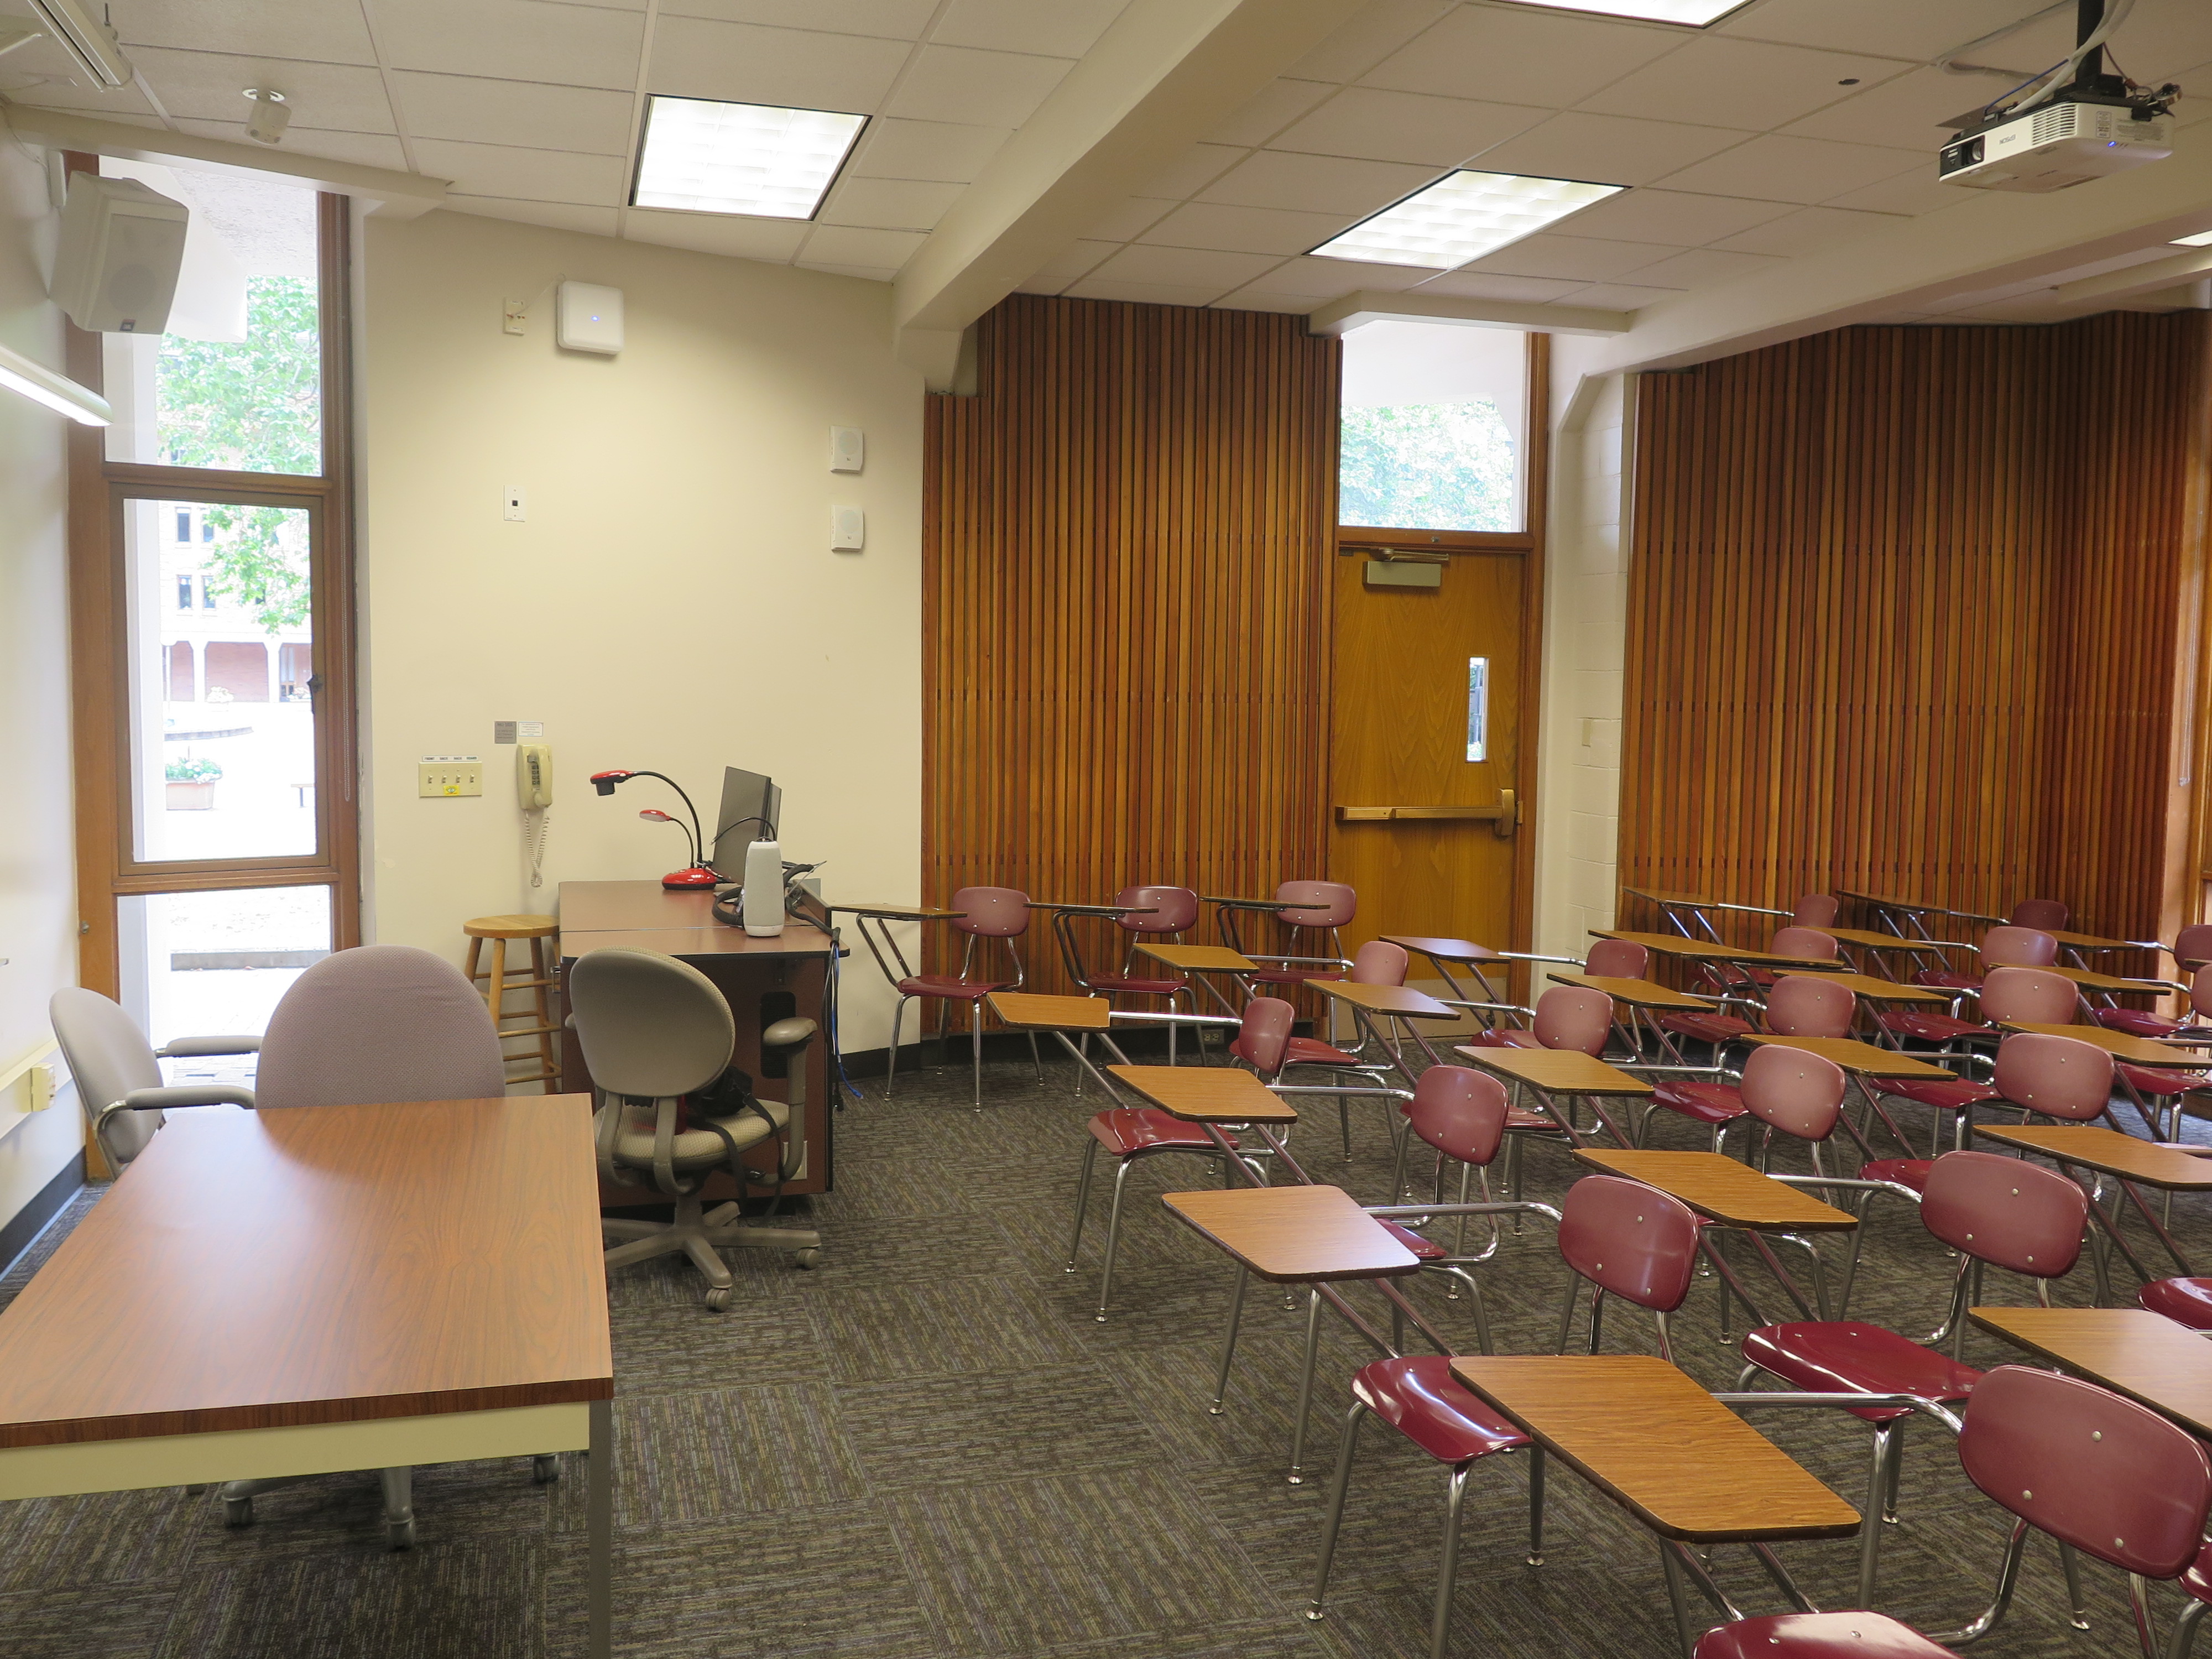 Room consists of carpet, moveable tablet armchairs and a table, podium and whiteboard located at the front of the room. 